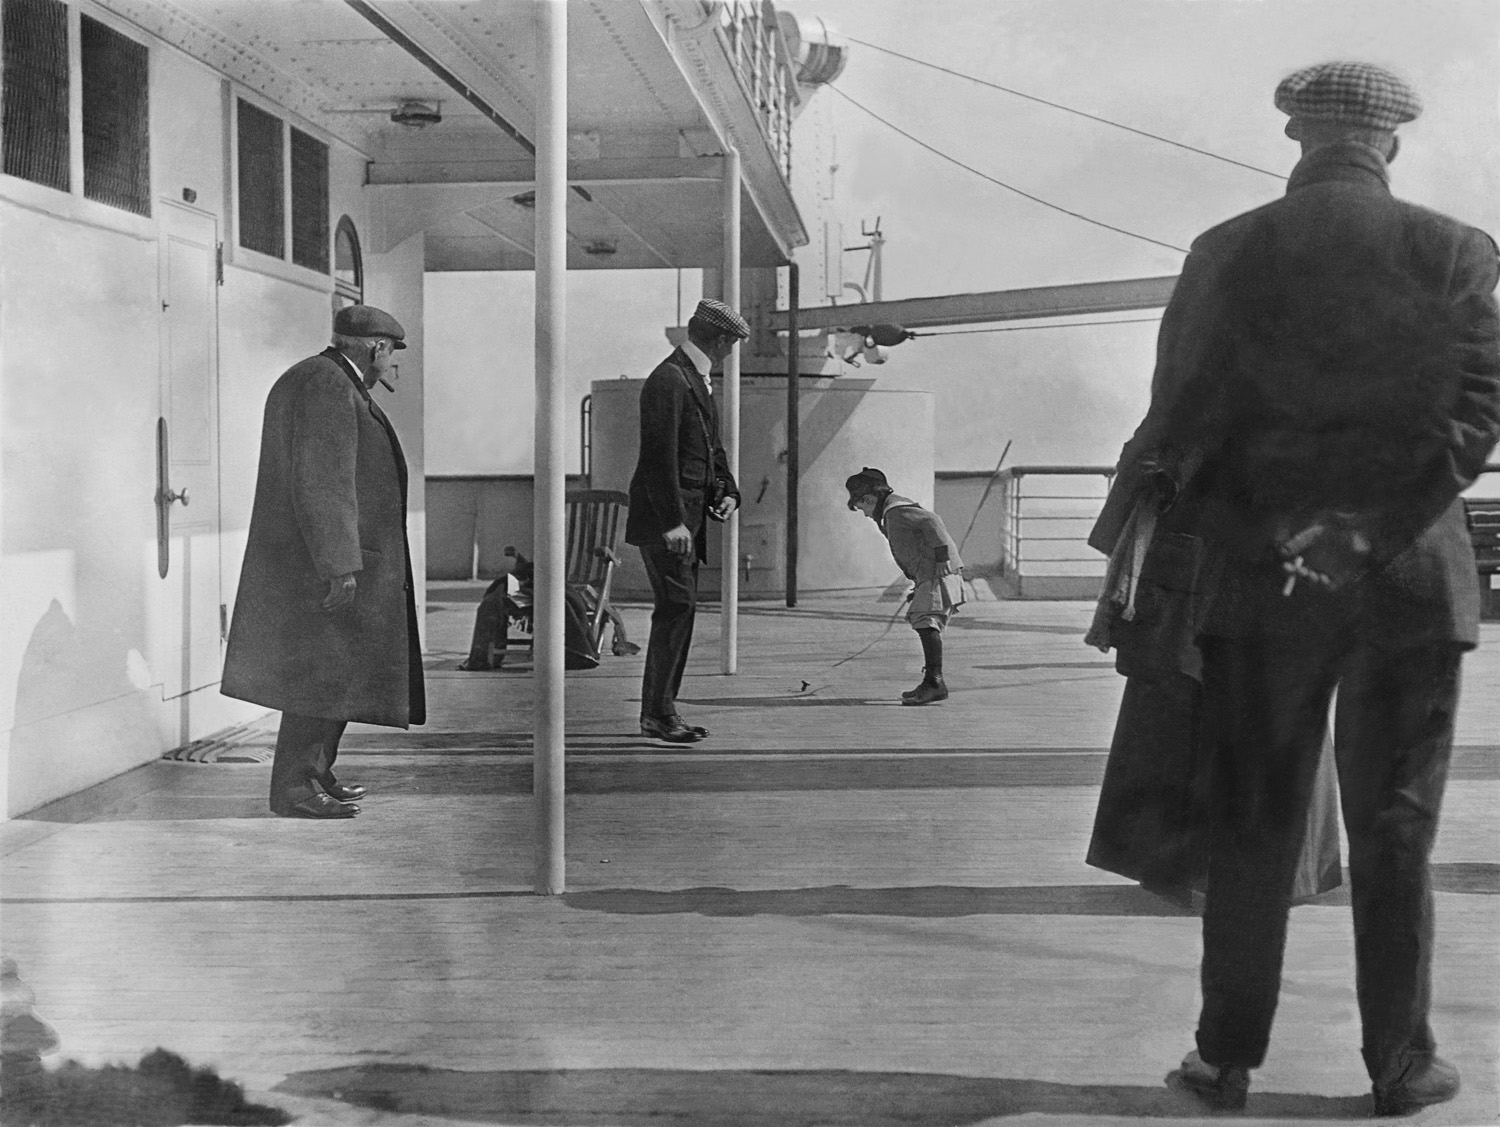 In a photograph taken by an Irish Jesuit, Father Francis Browne, aboard the Titanic, six-year-old Robert Douglas Spedden, plays with a spinning top while his father, Frederic, looks on.